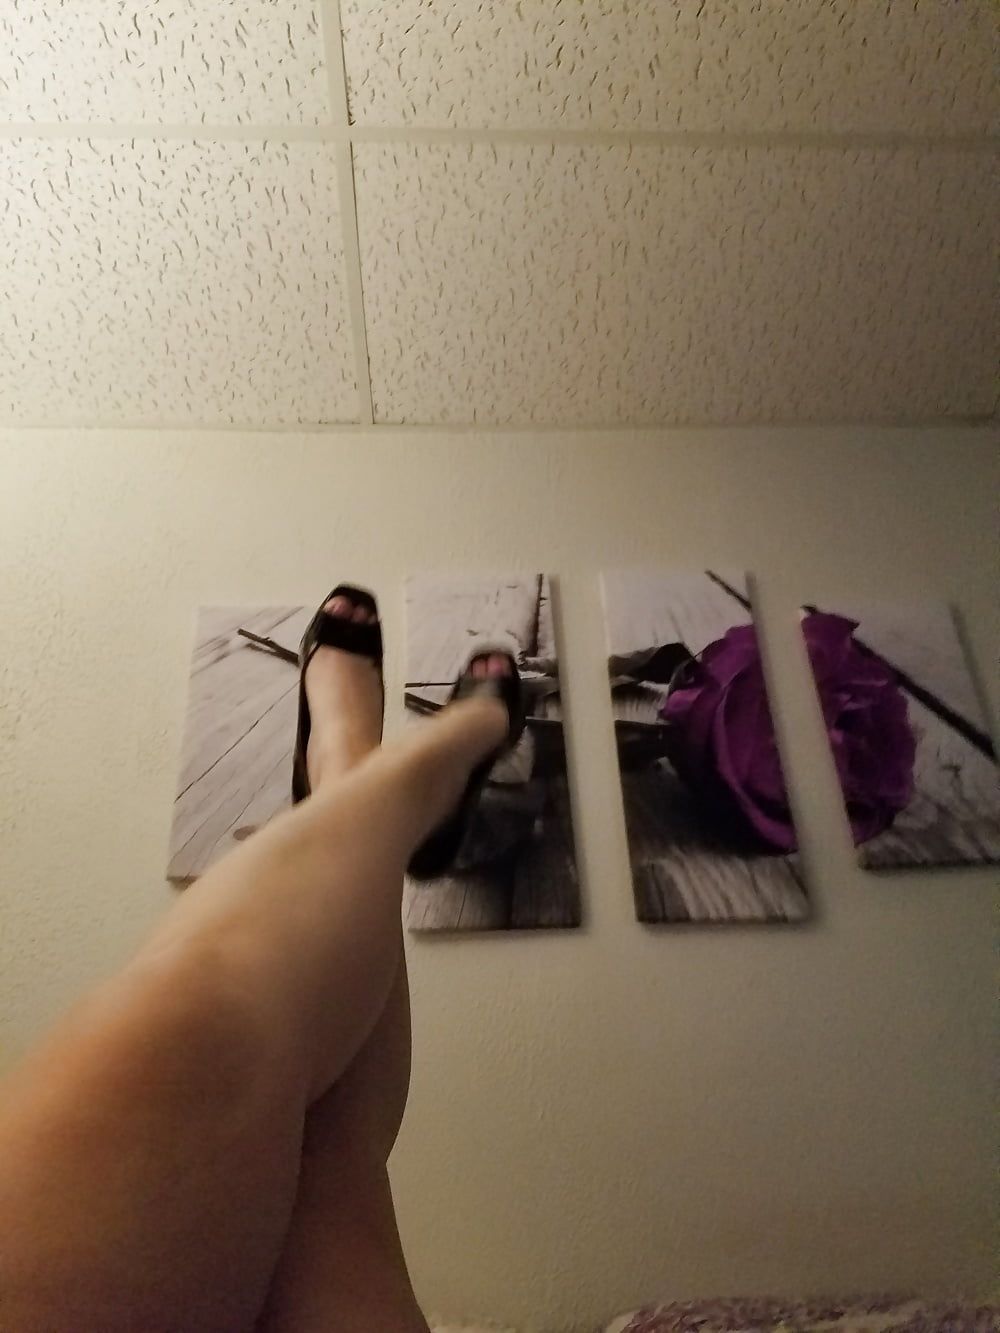 Feet, Legs, Heels & Boots of the Sweet Sexy Housewife  #9